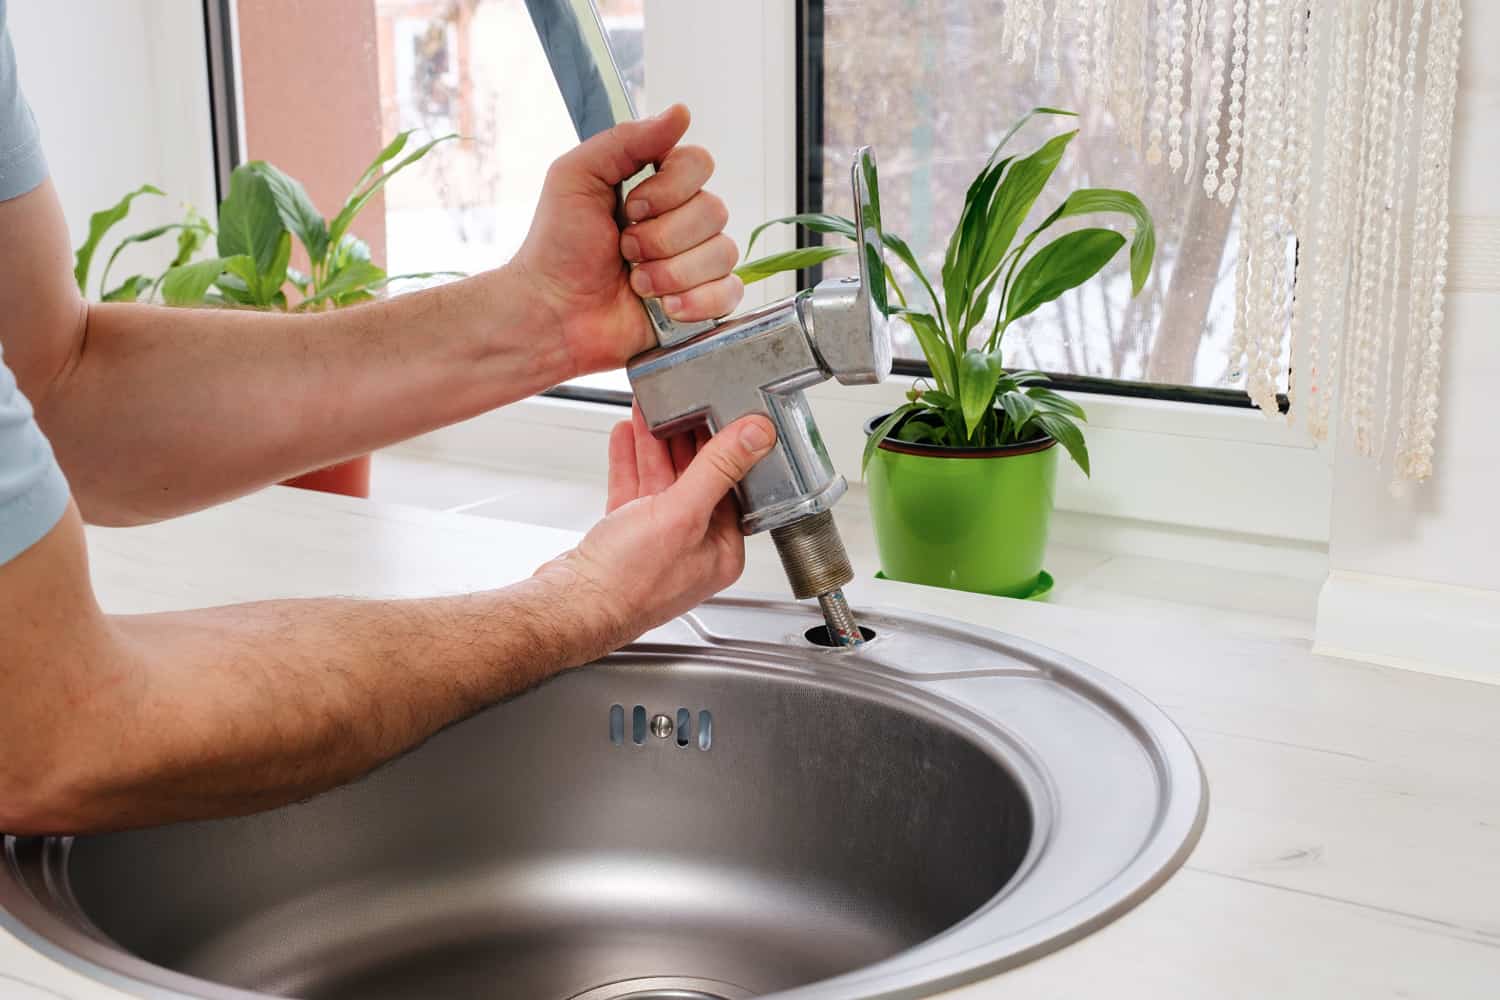 Plumber hands removes the old faucet from the kitchen sink for replacing it with a new one